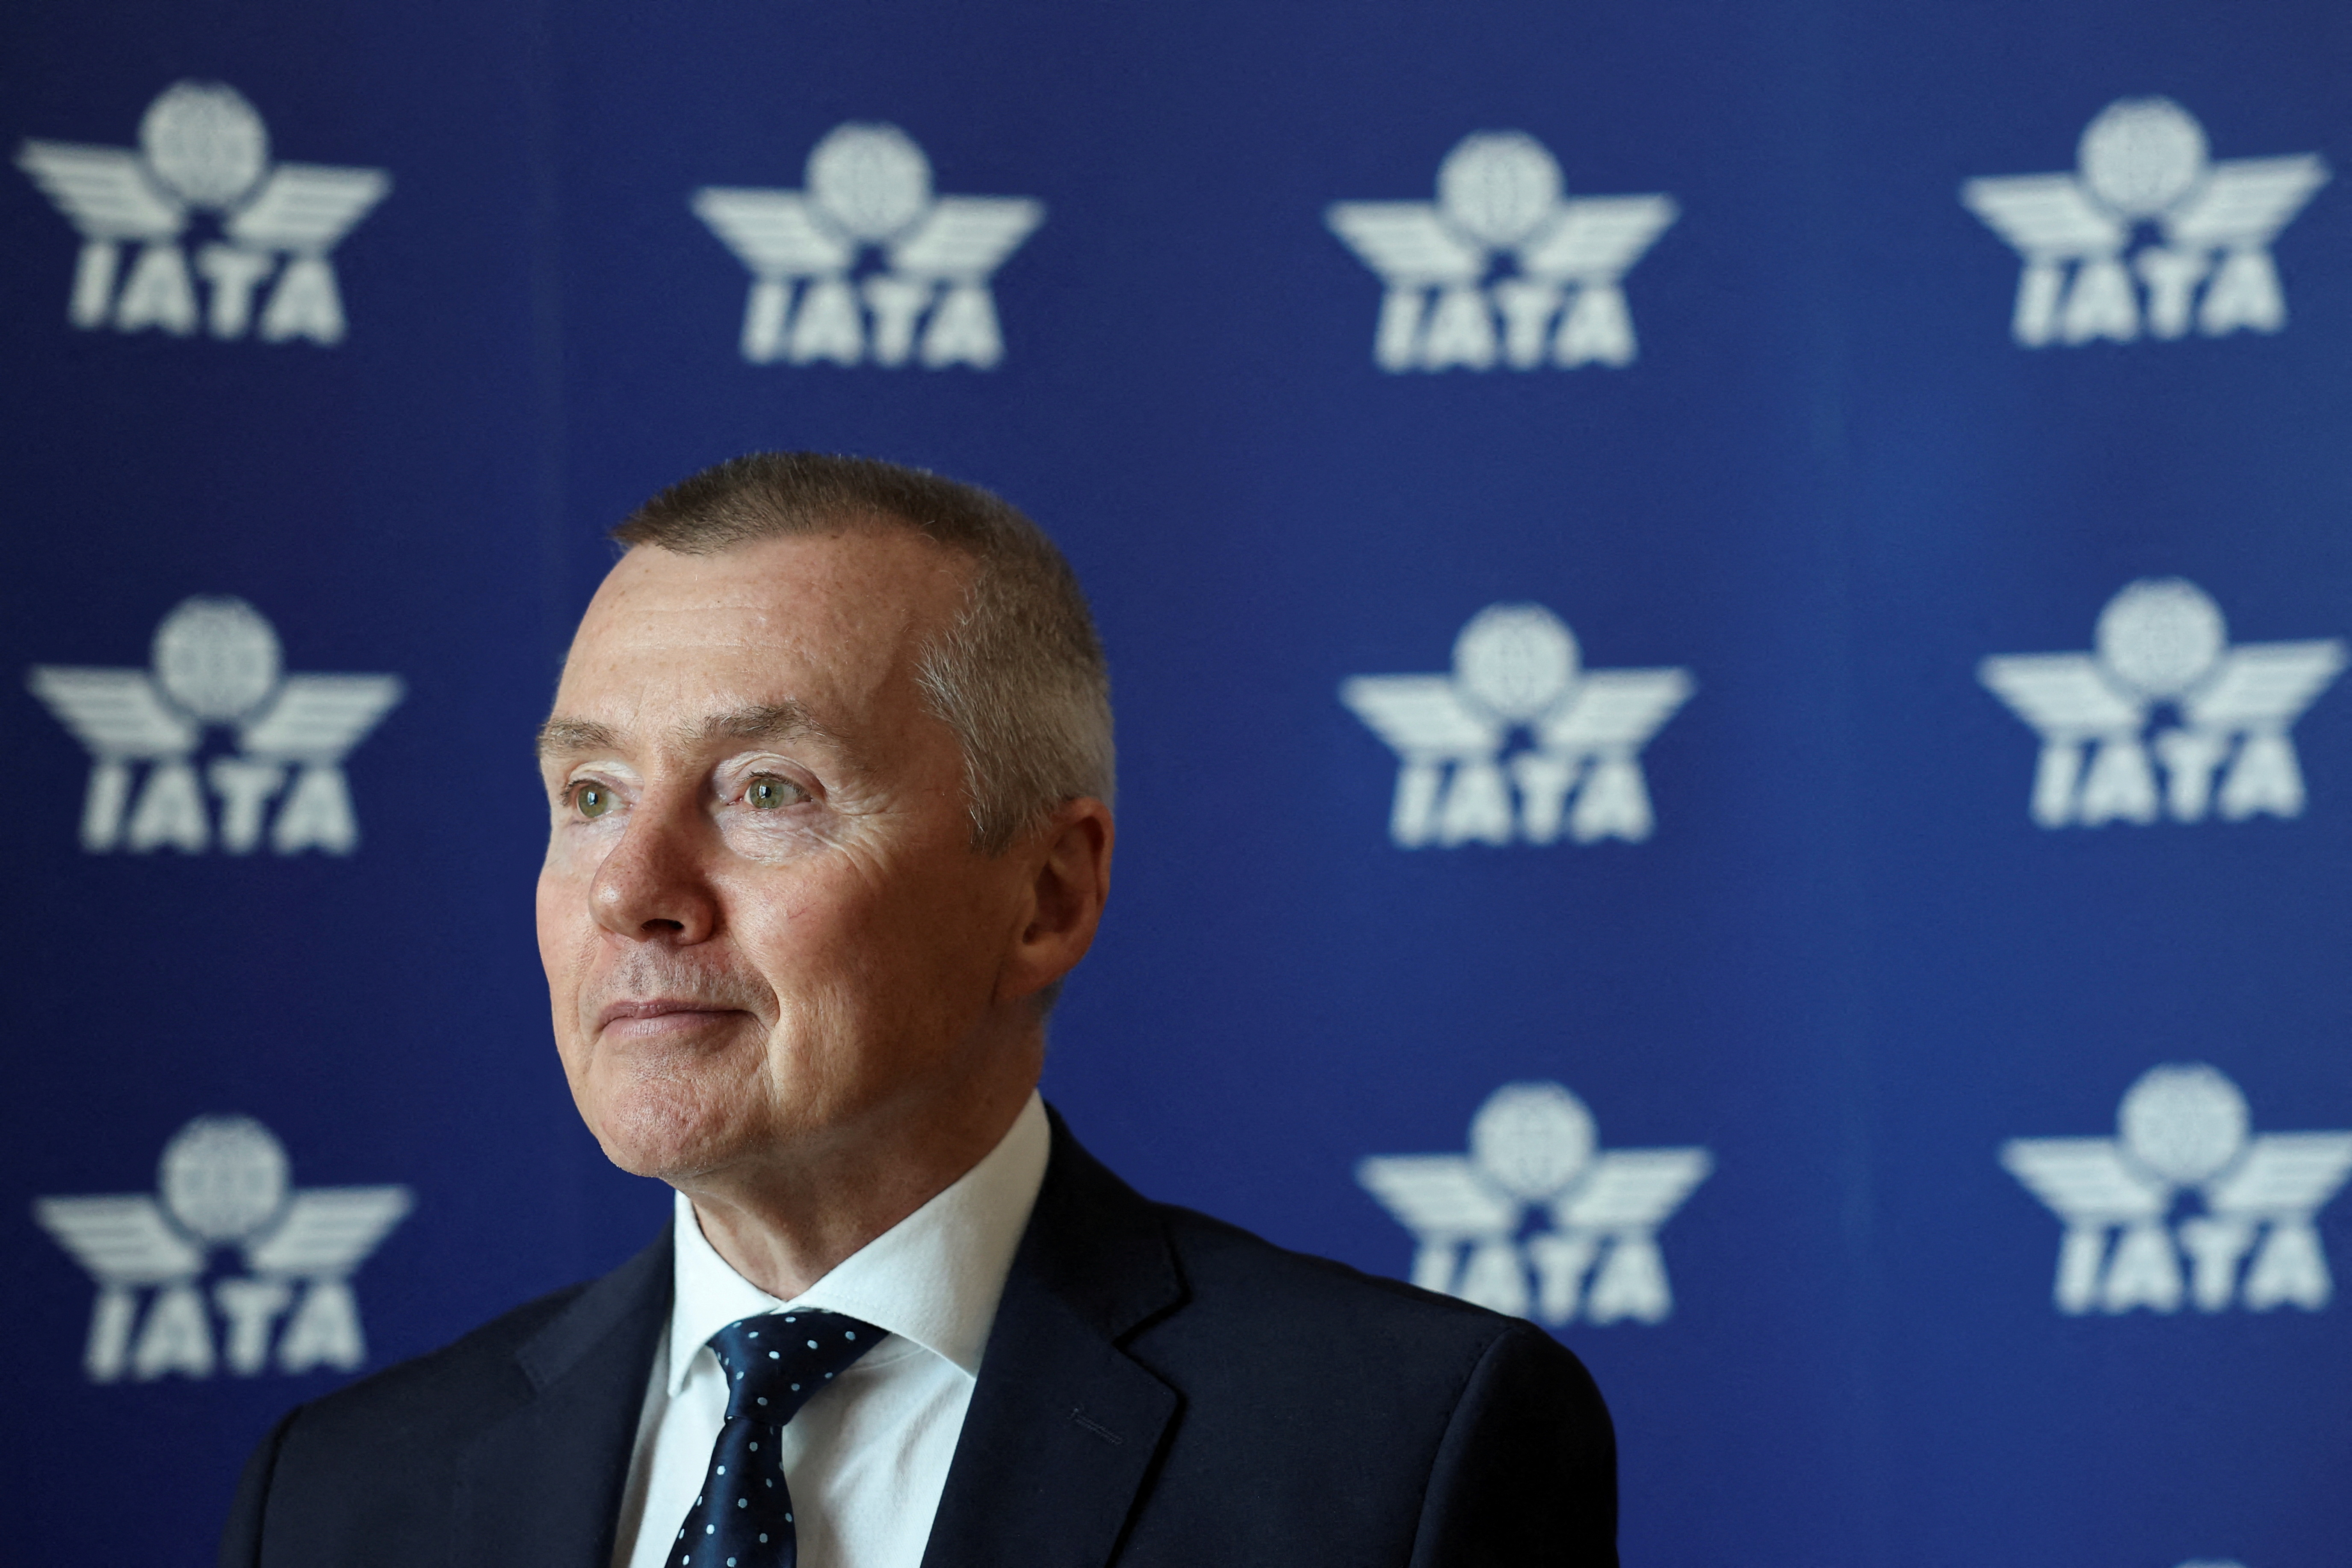 IATA Director General Willie Walsh looks on during an interview with Reuters in Dubai